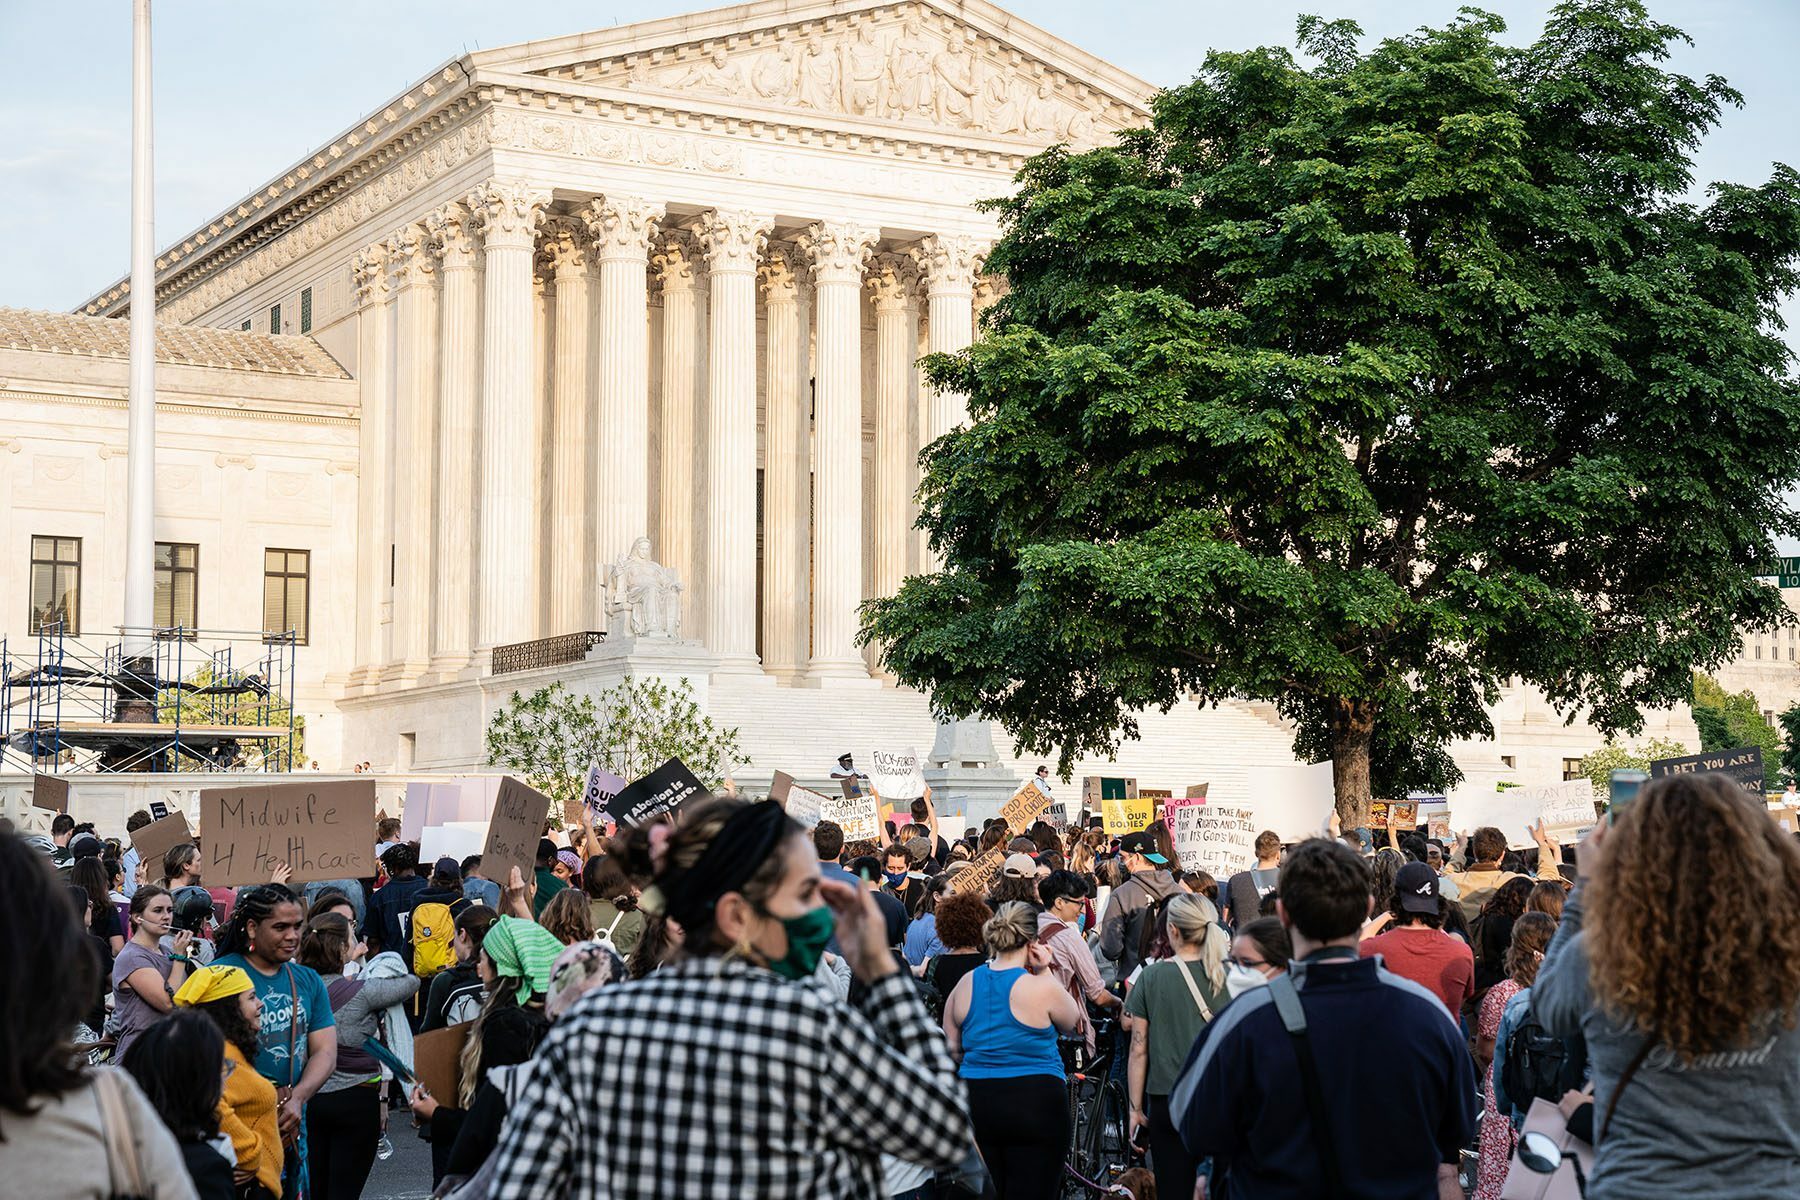 Crowds are seen protesting in front of the Supreme Court.